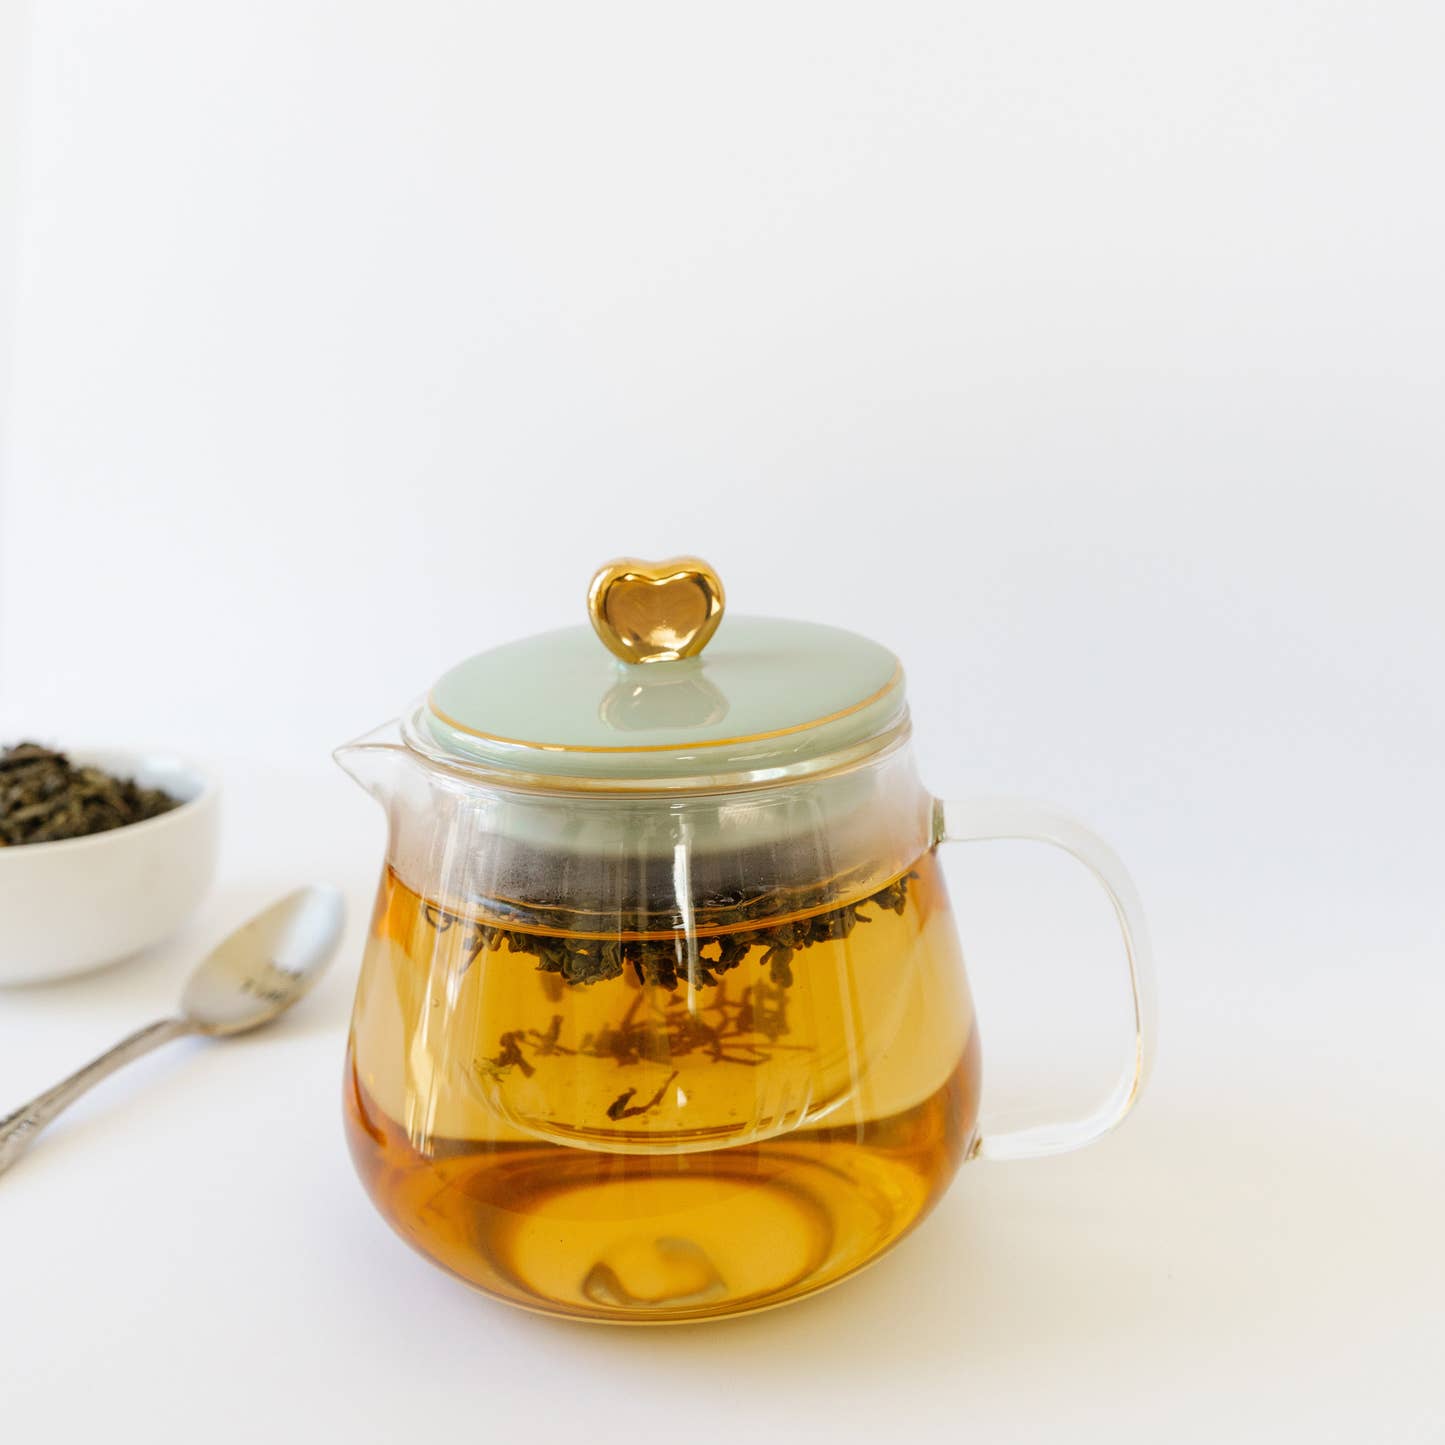 Sips by Glass Teapot | Removable Glass Tea Infuser | Star Accented Porcelain Lid | 20 oz Capacity | Loose Leaf Tea Gift Sets